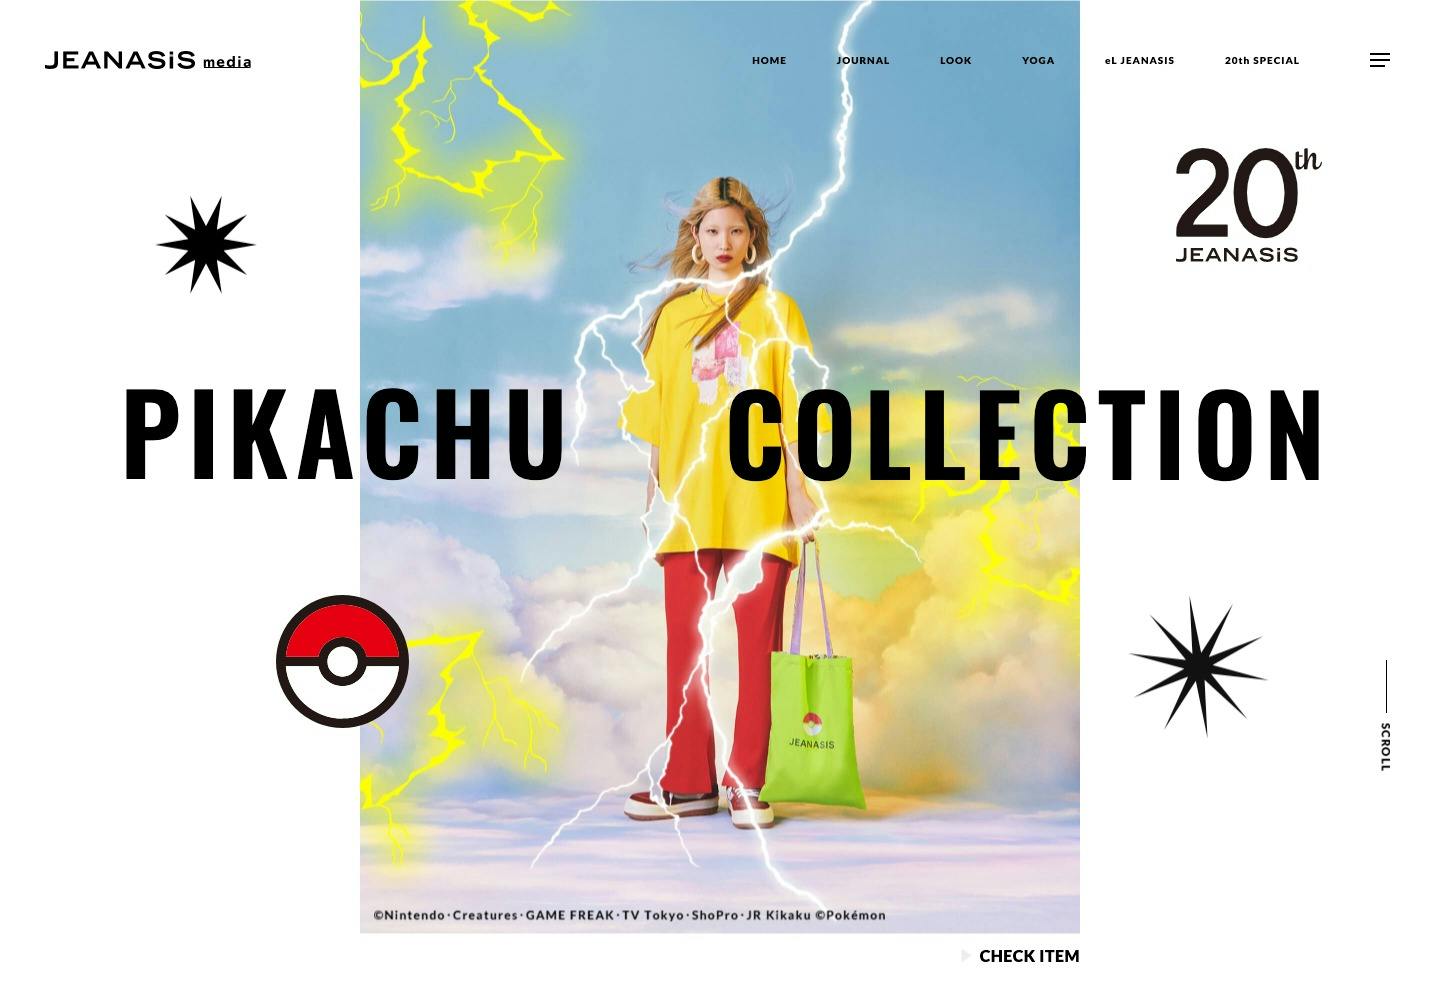 Cover Image for PIKACHU COLLECTION｜jeanasis media